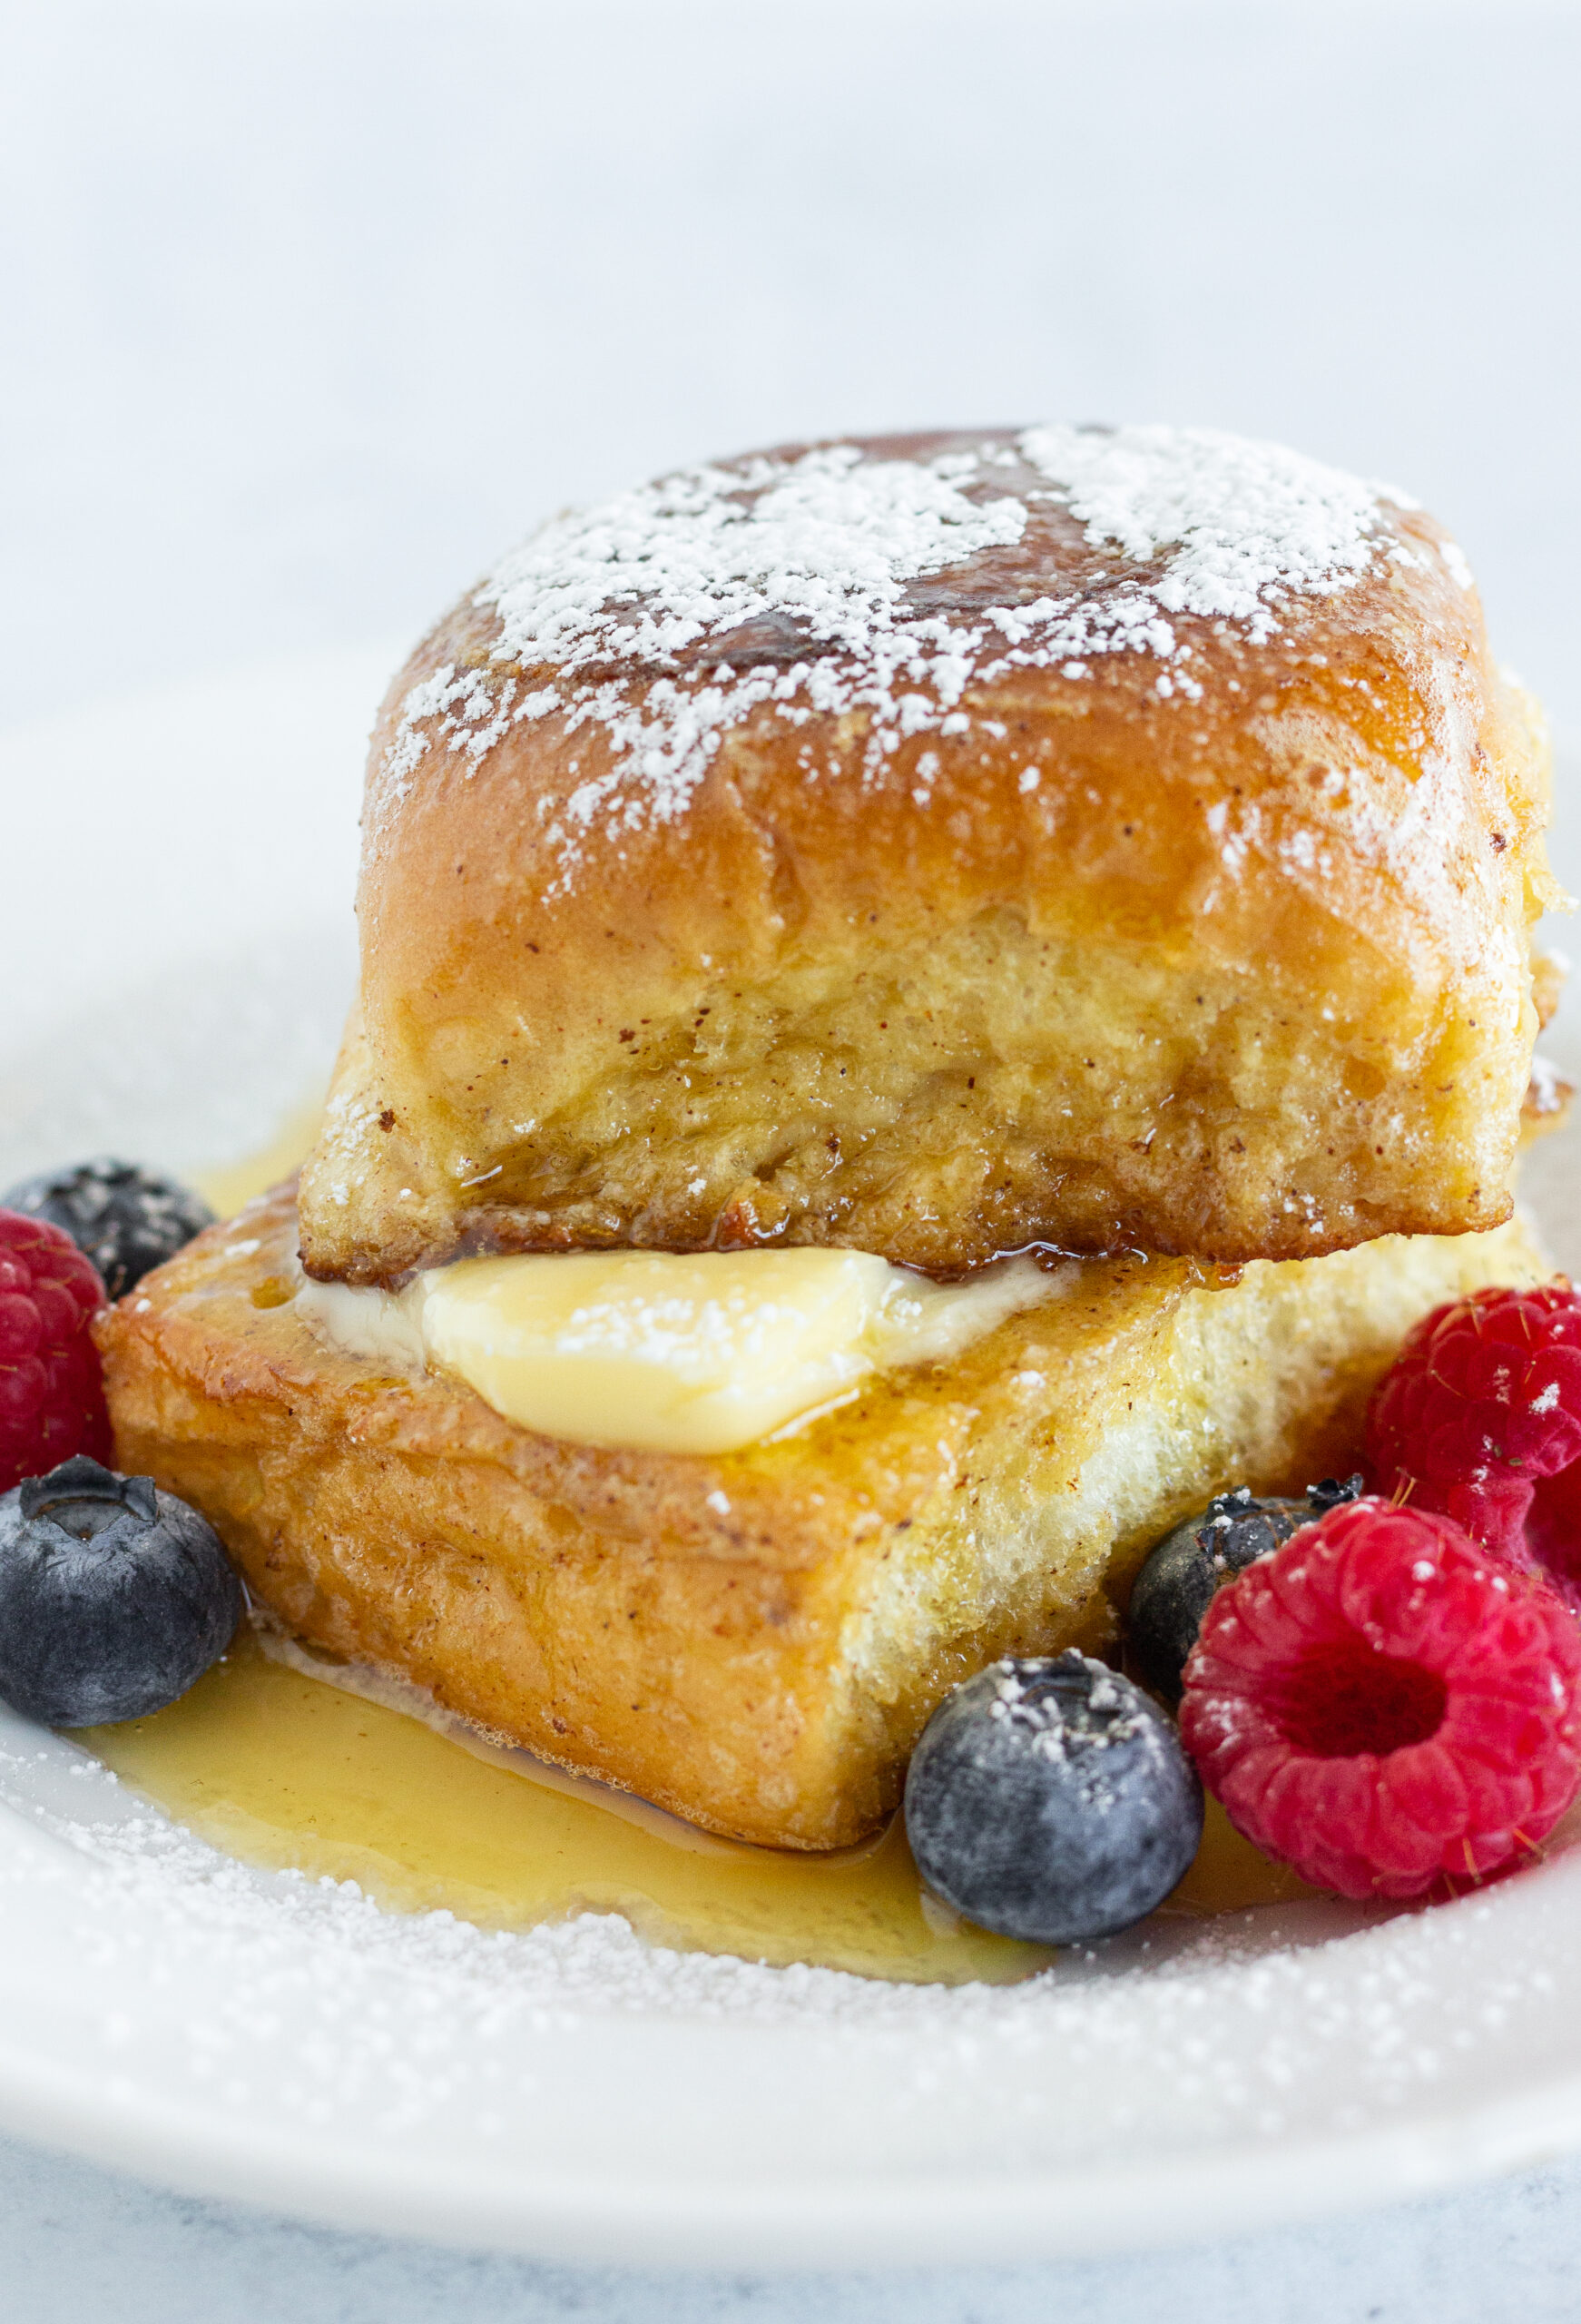 Hawaiian Roll French Toast, by Top US food blog Practically Homemade